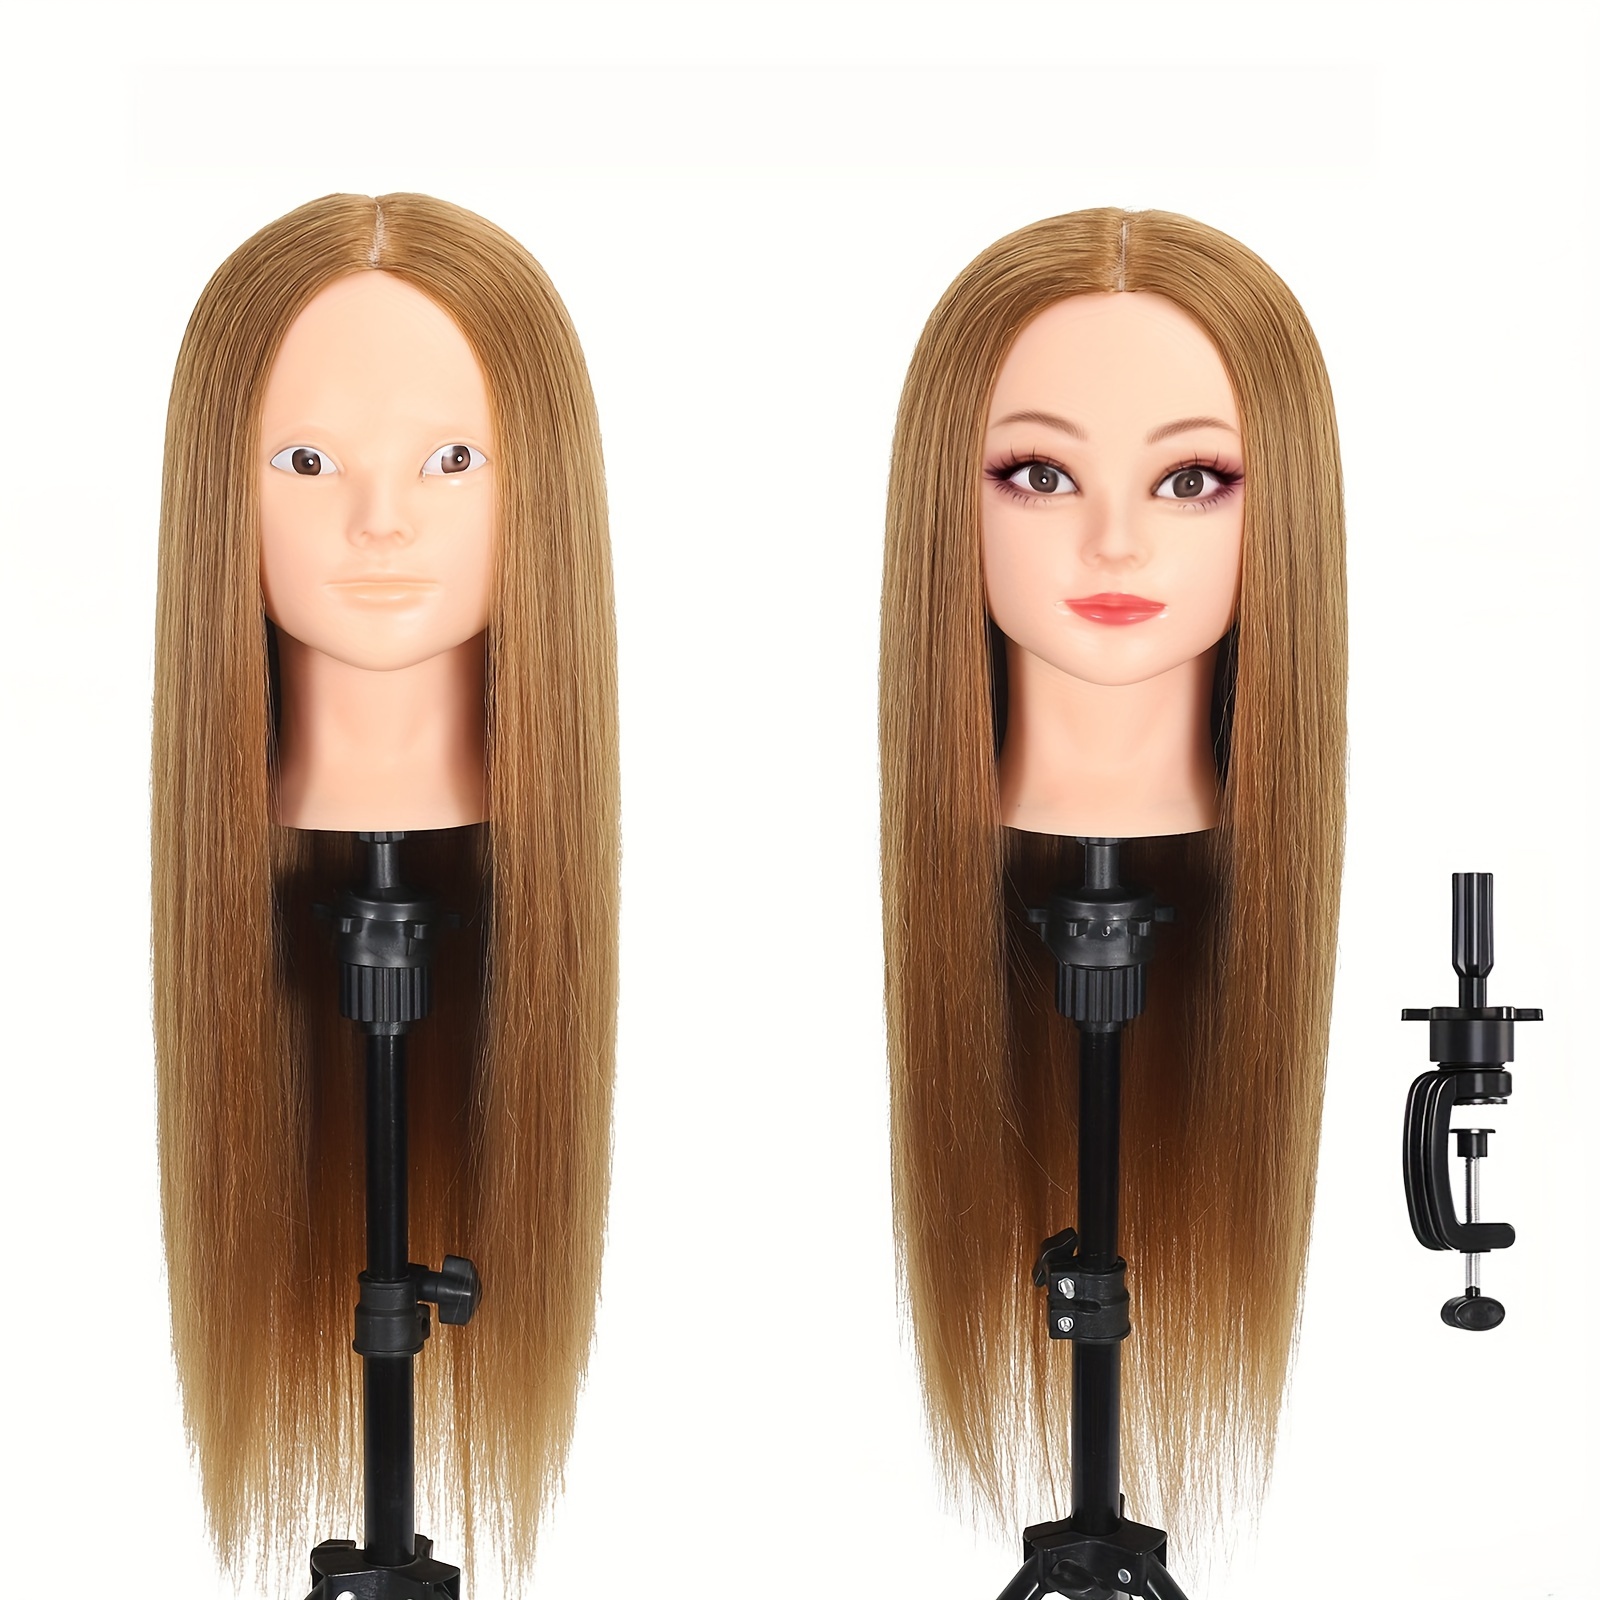 Mannequin Head 70% Female Mannequin Heads with Long Hair, Hairdresser  Training Head, Practice Hair Cutting, Curling, Braiding, Makeup, Styling